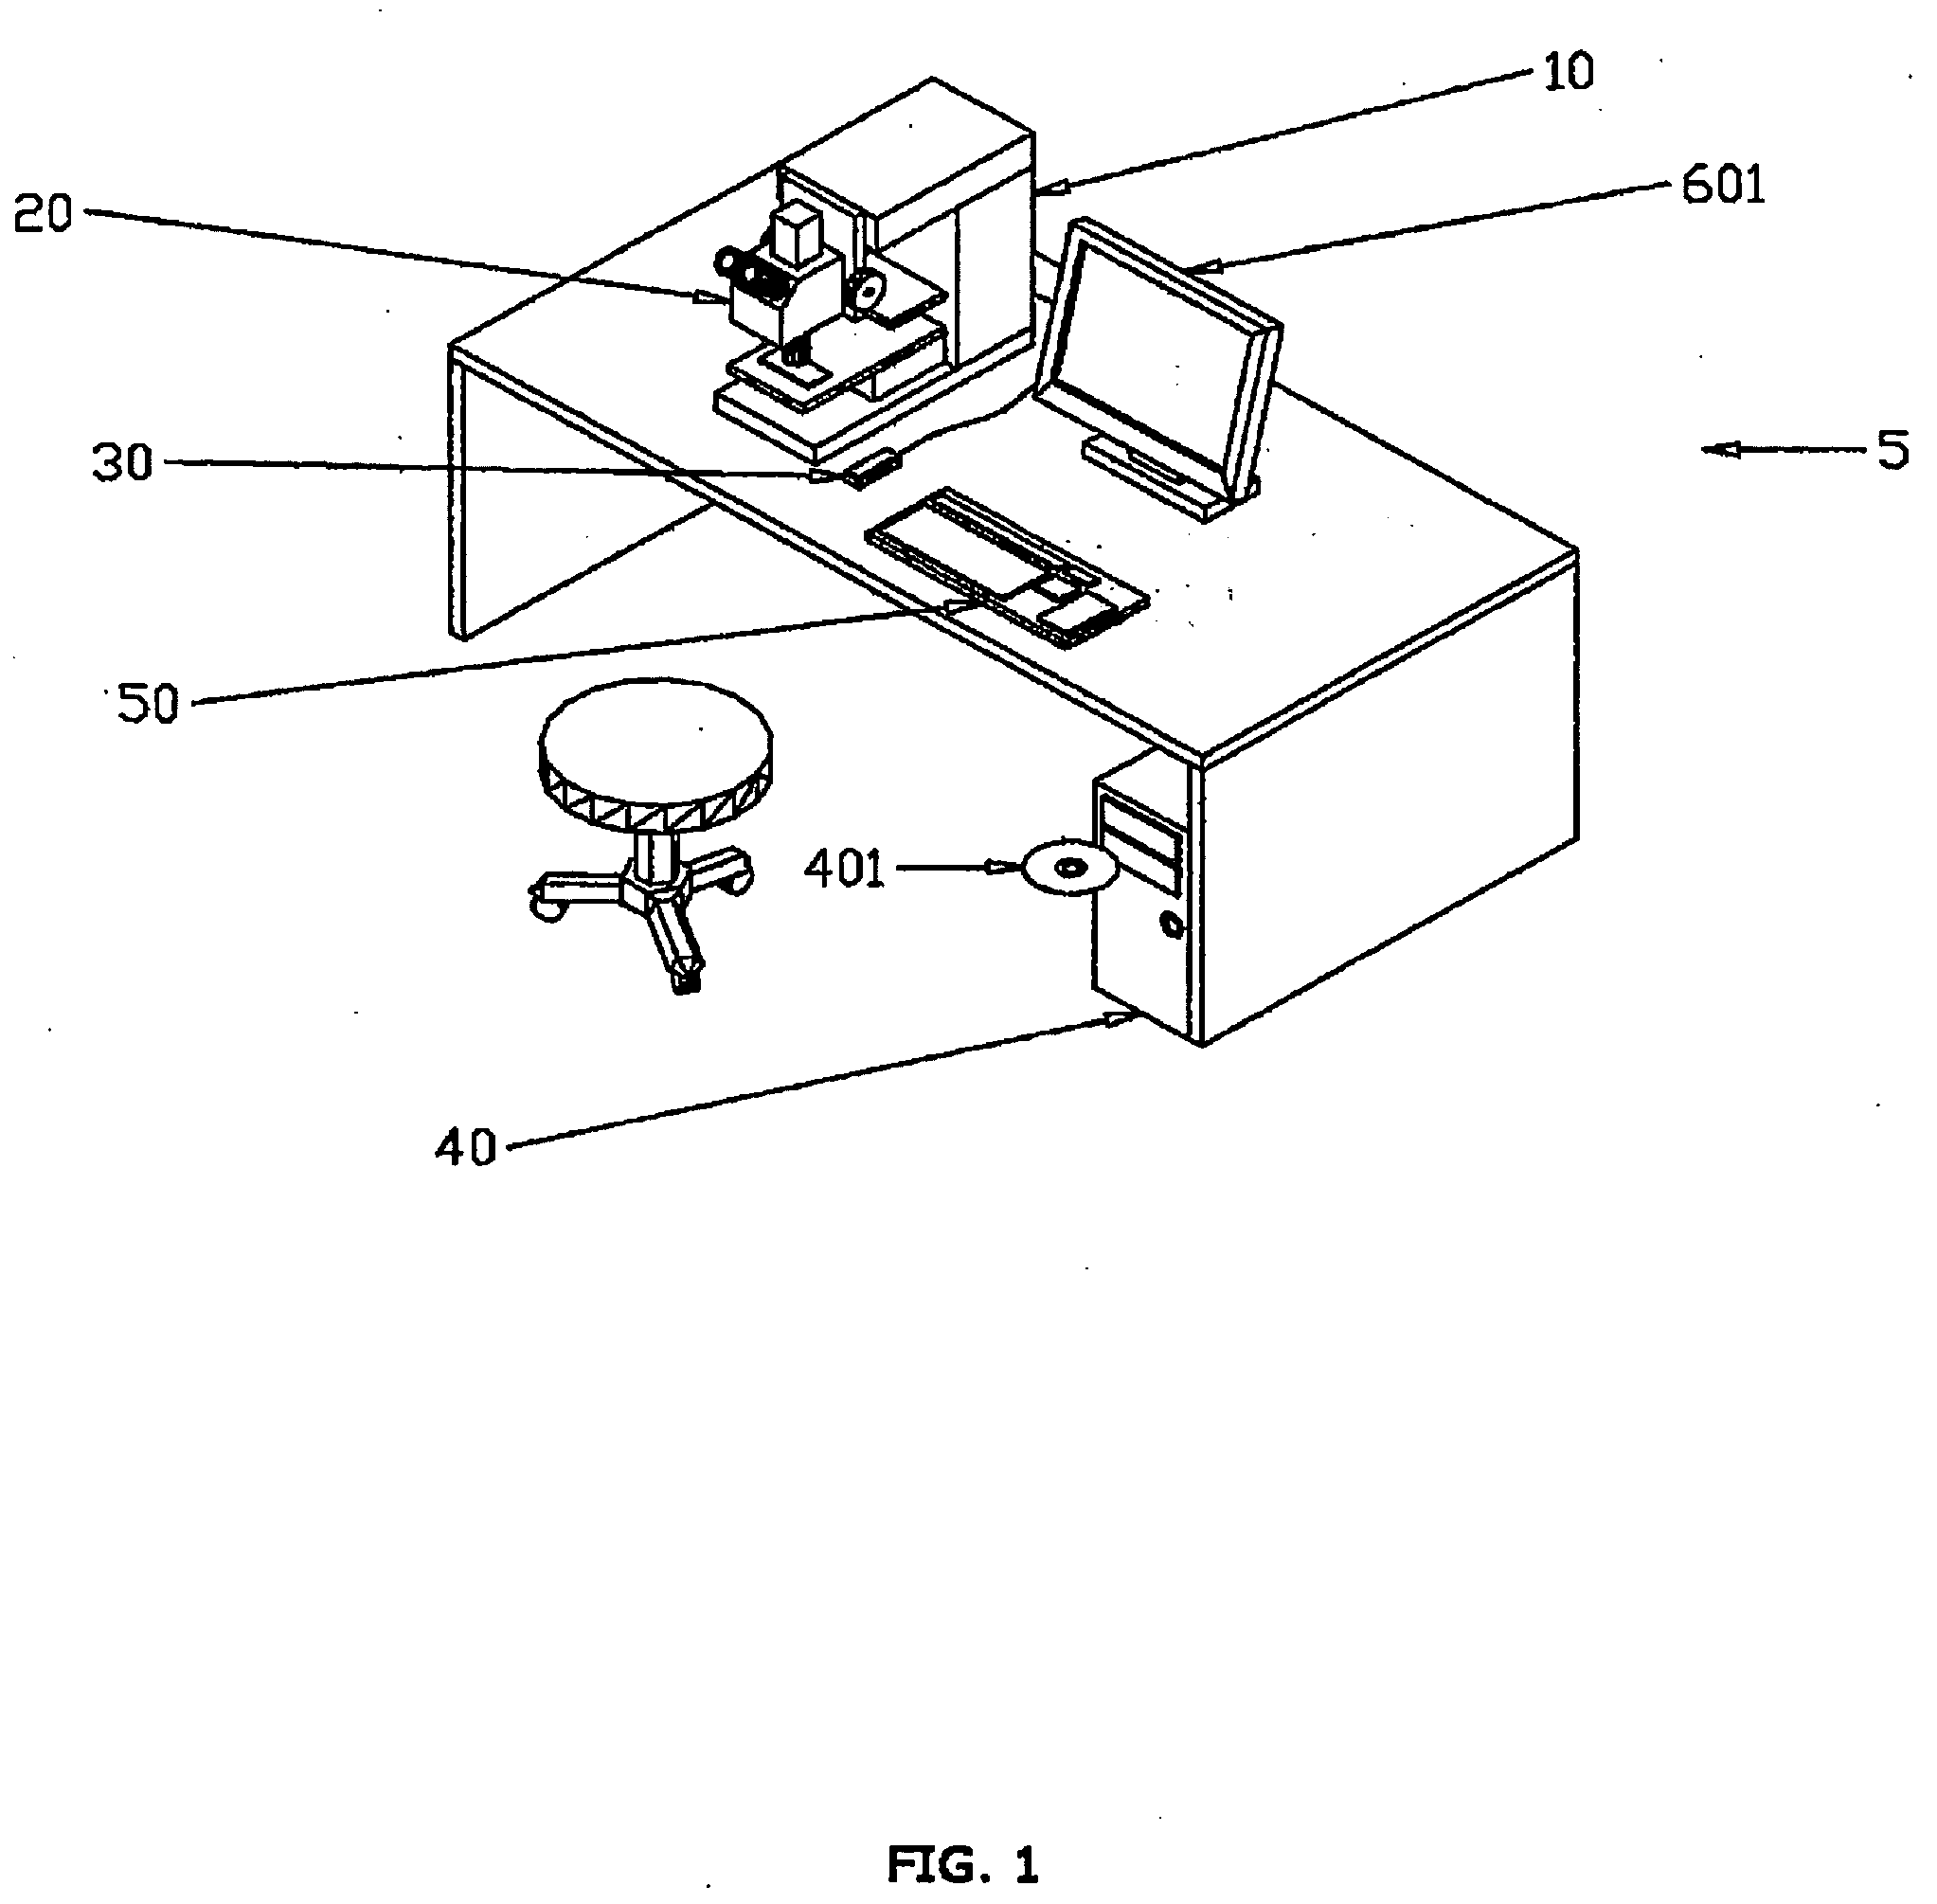 Tissue punch and tissue sample labeling methods and devices for microarray preparation, archiving and documentation